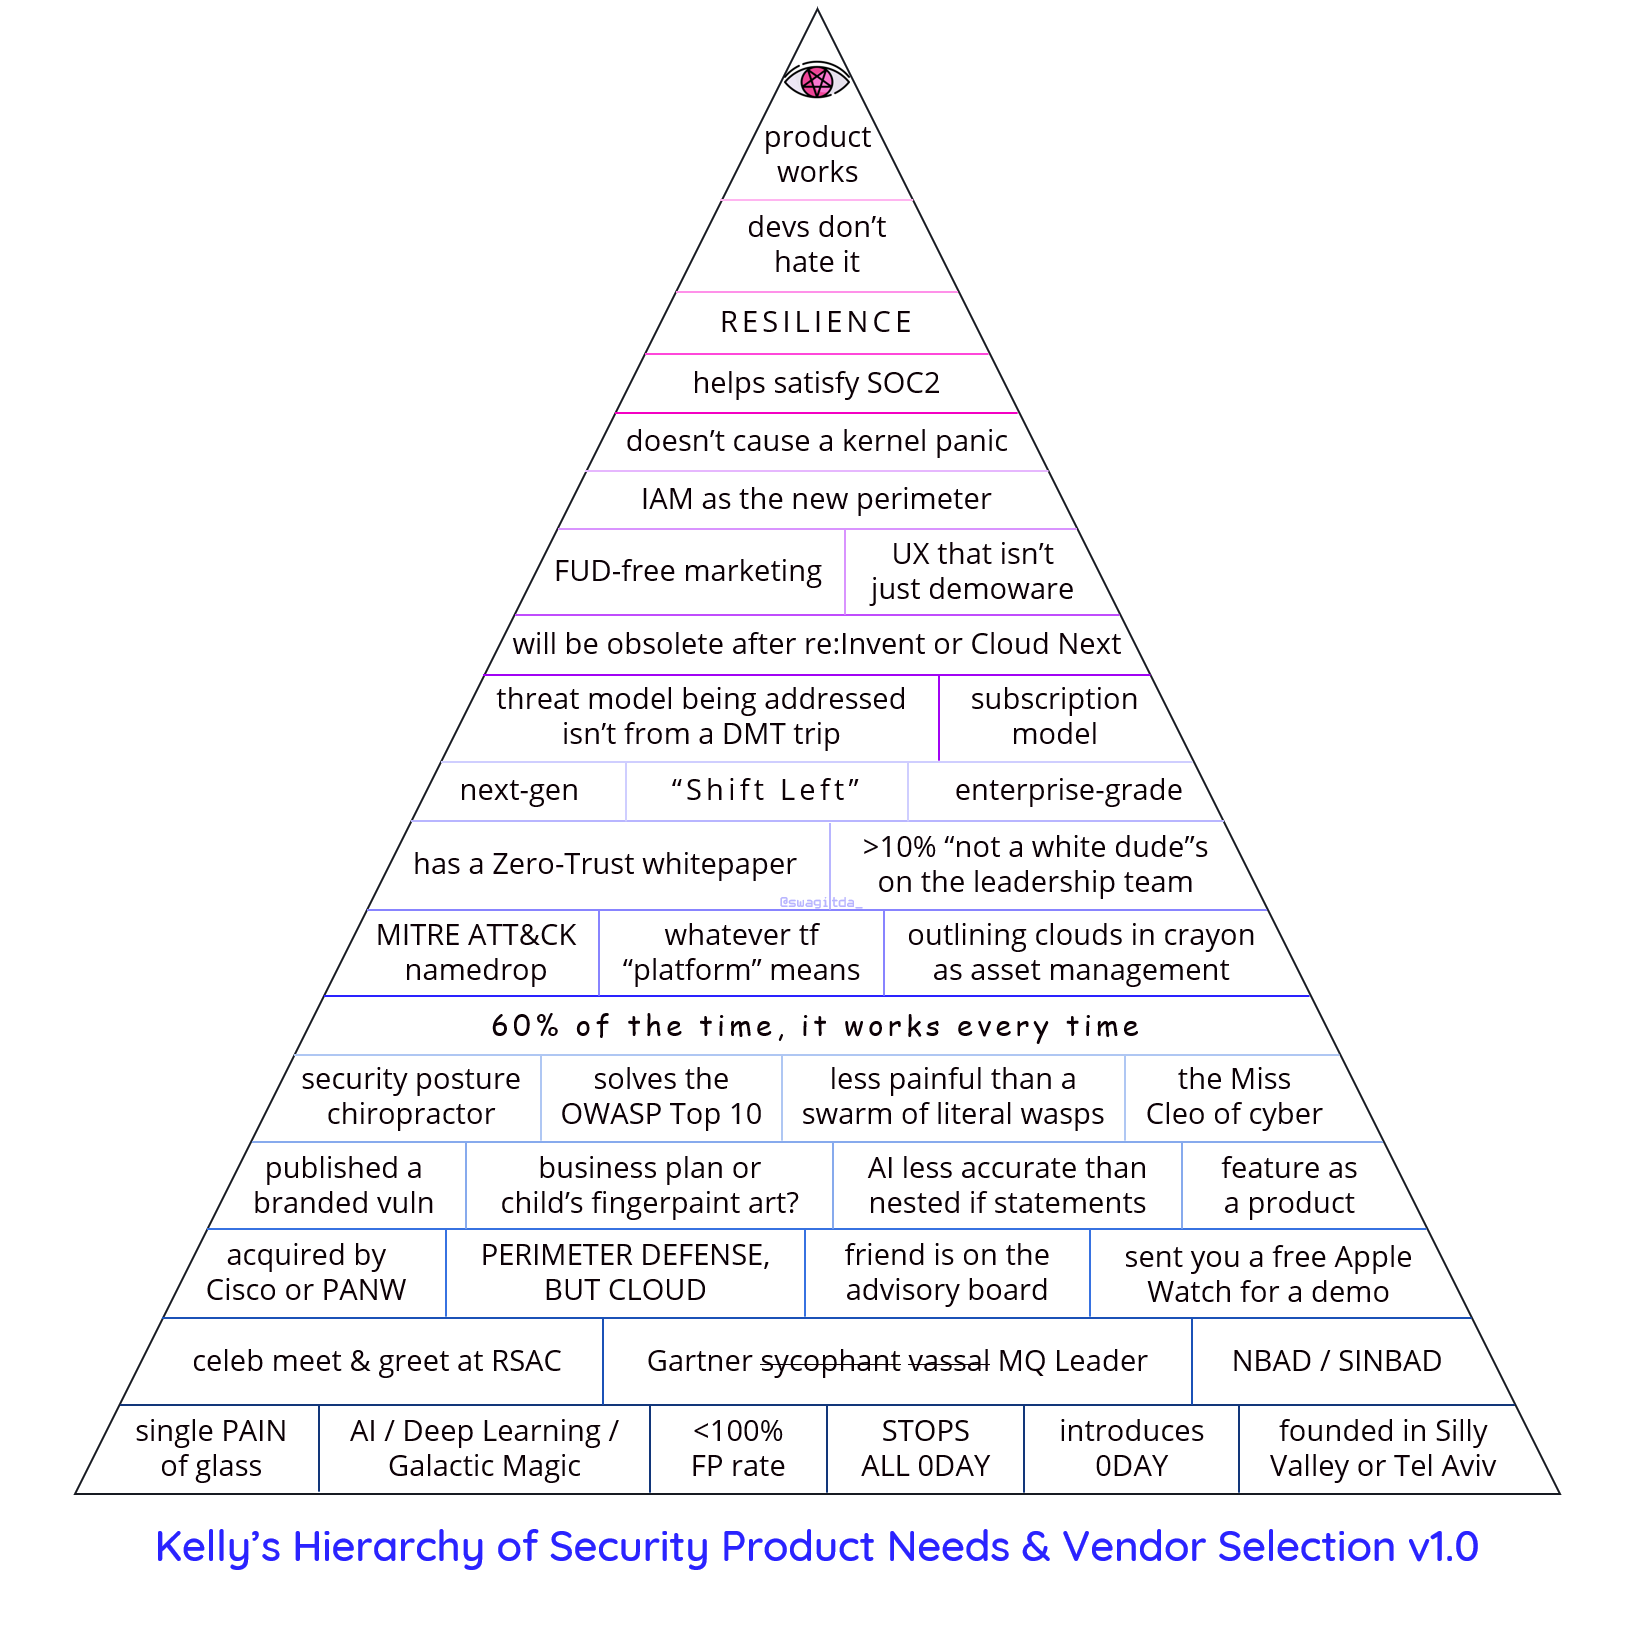 A triangle, similar to Maslow’s hierarchy of needs, but for infosec. Starting at the bottom, the first row includes: single PAIN of glass, AI / Deep Learning / Galactic Magic, less than 100 percent false positive rate, STOPS ALL ZERO DAY, introduces 0day, founded in Silly Valley or Tel Aviv. The second row includes: celeb meet and greet at RSA, Gartner sycophant (crossed out) vassal (crossed out) Magic Quadrant Leader, NBAD / SINBAD. The third row includes: acquired by Cisco or Palo Alto Networks, PERIMETER DEFENSE BUT CLOUD, friend is on the advisory board, sent you a free Apple Watch for a demo. The fourth row includes: published a branded vulnerability, business plan or child’s fingerpaint art?, AI less accurate than nested if statements, feature as a product. The fifth row includes: security posture chiropractor, solves the OWASP top 10, less painful than a swarm of literal wasps, the Miss Cleo of Cyber. The sixth row includes: 60 percent of the time, it works every time. The seventh row includes: MITRE ATT&CK namedrop, whatever tf platform means, outlining clouds in crayon as asset management. The eighth row includes: has a zero trust whitepaper, greater than 10 percent not-a-white-dudes on the leadership team. The ninth row includes: next-gen, “Shift Left,” enterprise-grade. The tenth row includes: threat model being addressed isn’t from a DMT trip, subscription model. The eleventh row includes: will be obsolete after re:Invent or Cloud Next. The twelfth row includes: FUD-free marketing, UX that isn’t just demoware. The thirteenth row includes: IAM as the new perimeter. The fourteenth row includes: doesn’t cause a kernel panic. The fifteenth row includes: helps satisfy SOC2. The sixteenth row includes: resilience. The seventeenth row includes: developers don’t hate it. The eighteenth row includes: product works. There is also an eye with a hot pink iris and a hexagram pupil at the top, for flare.